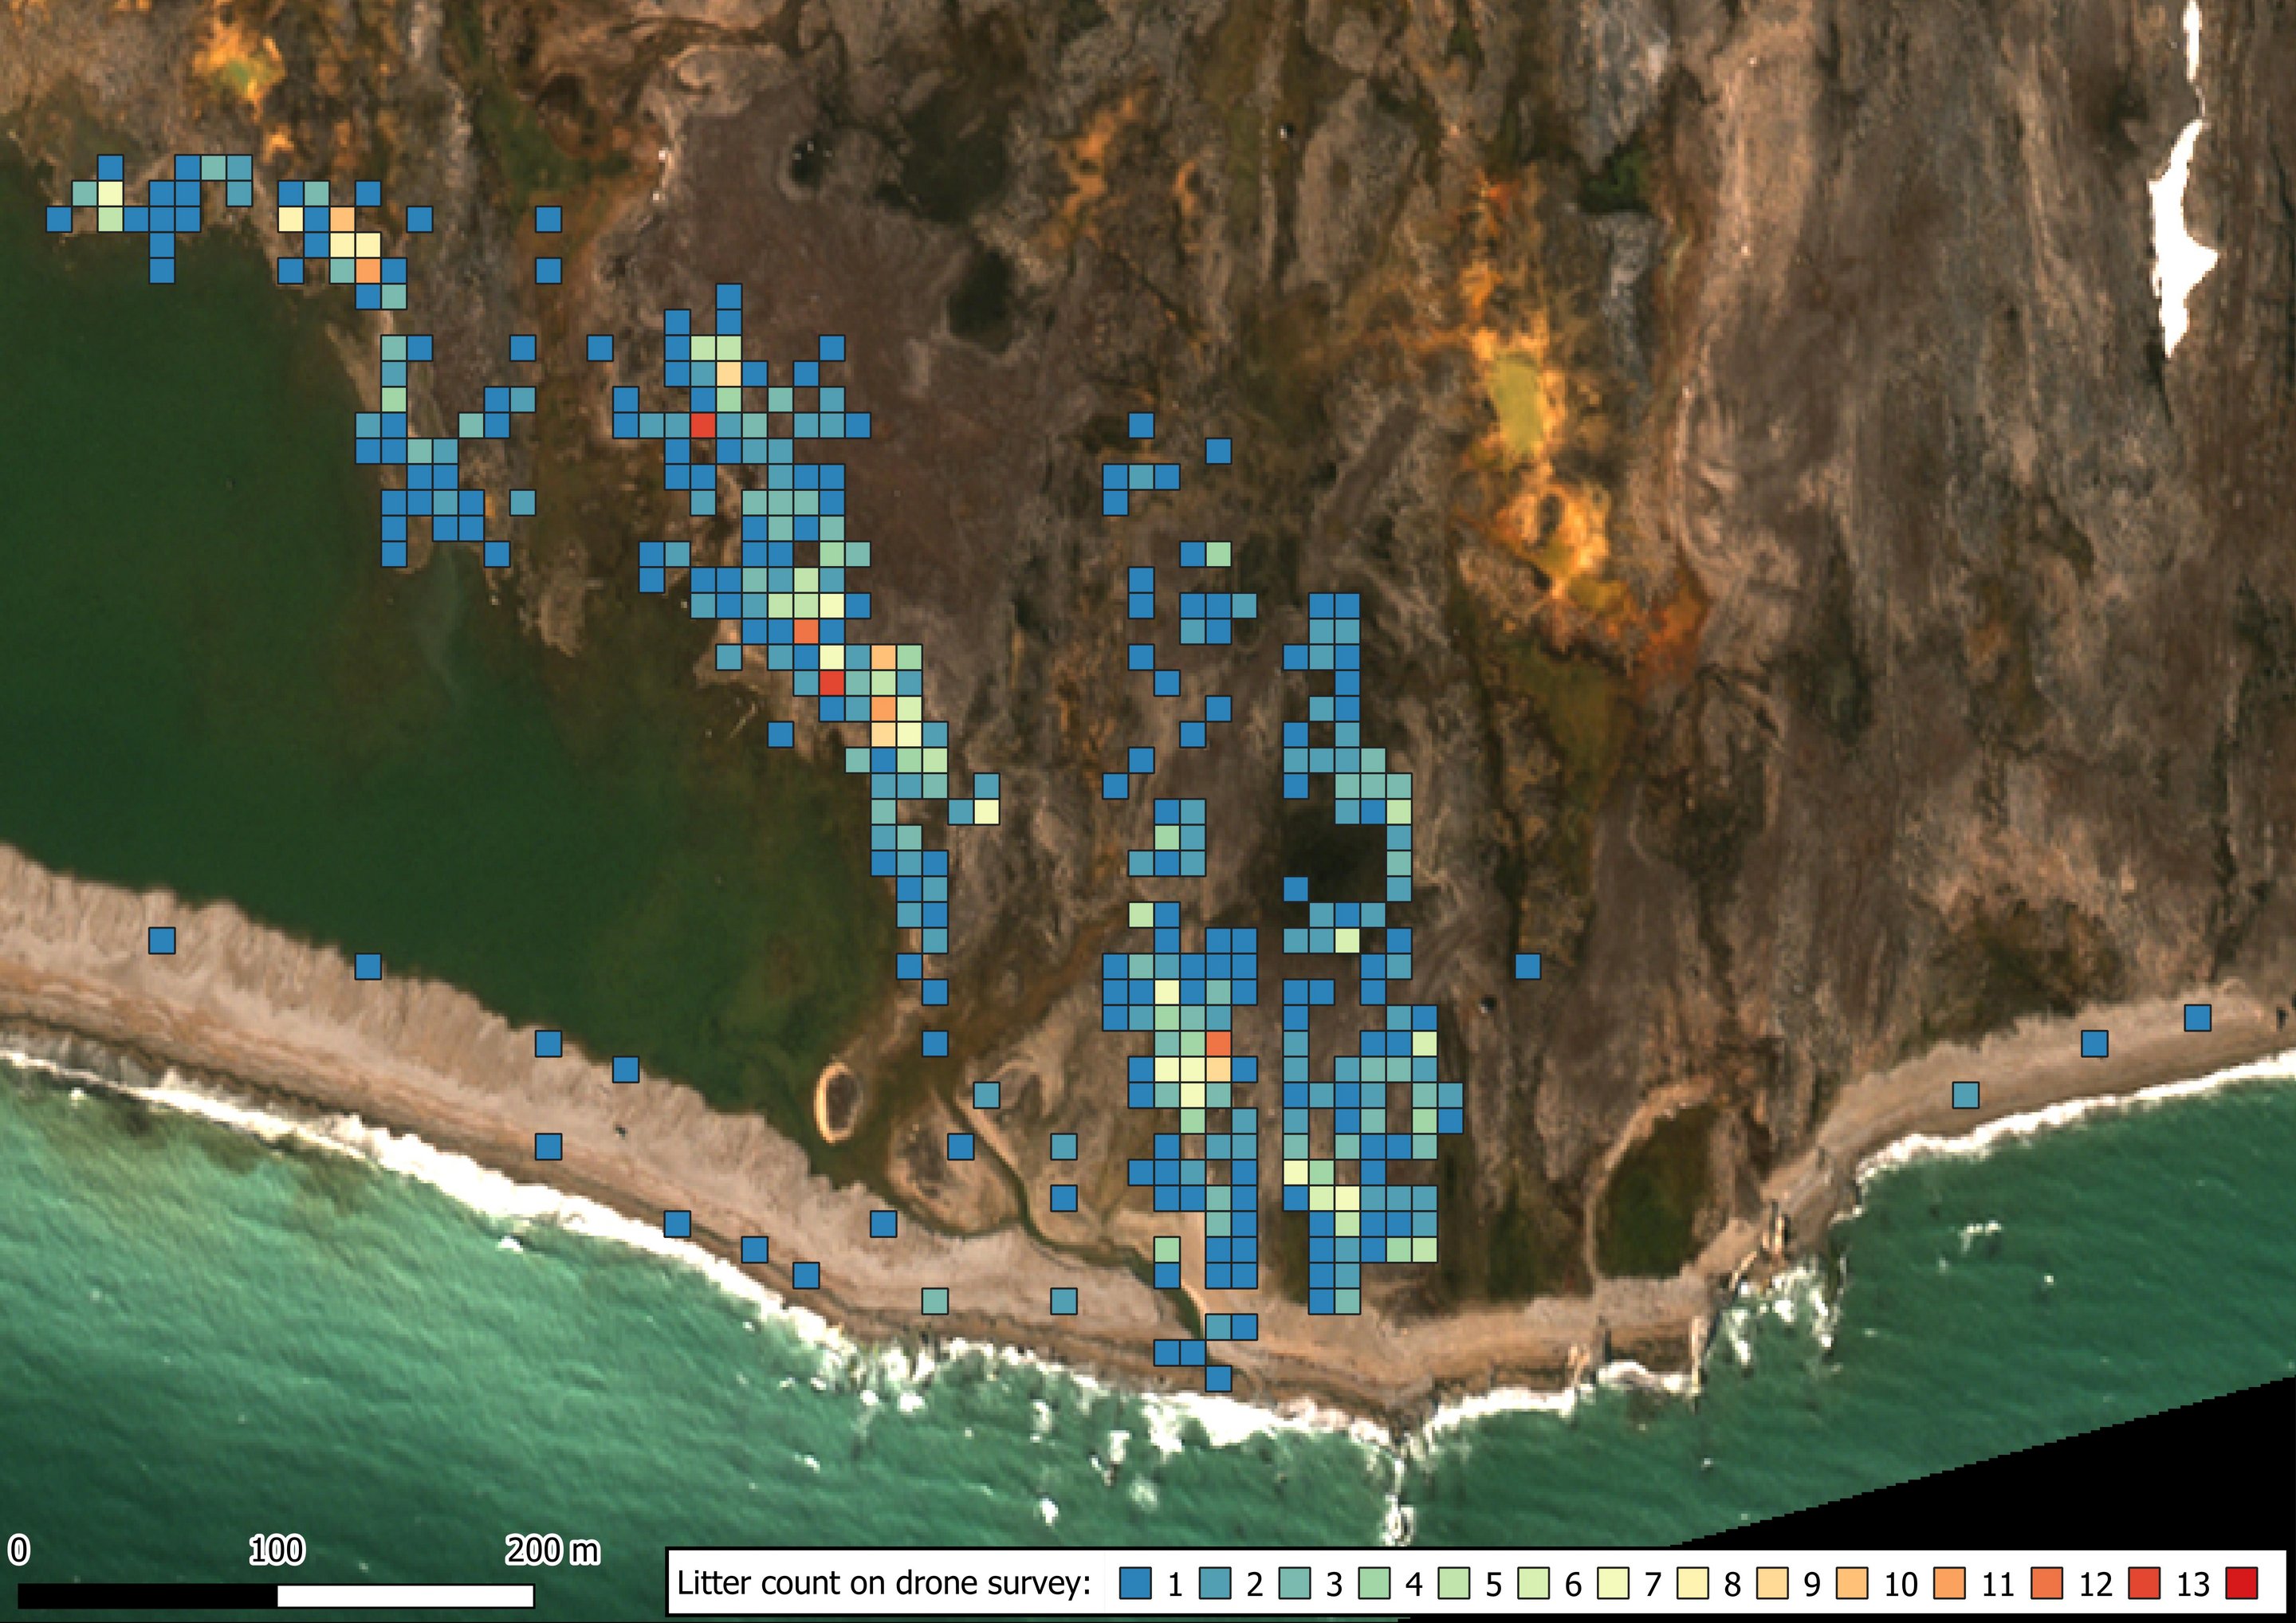 WV3 Satellite image of a shoreline in the Arctic with plastic objects identified in the drone images. The identified objects are marked in a grid with coloured squares.